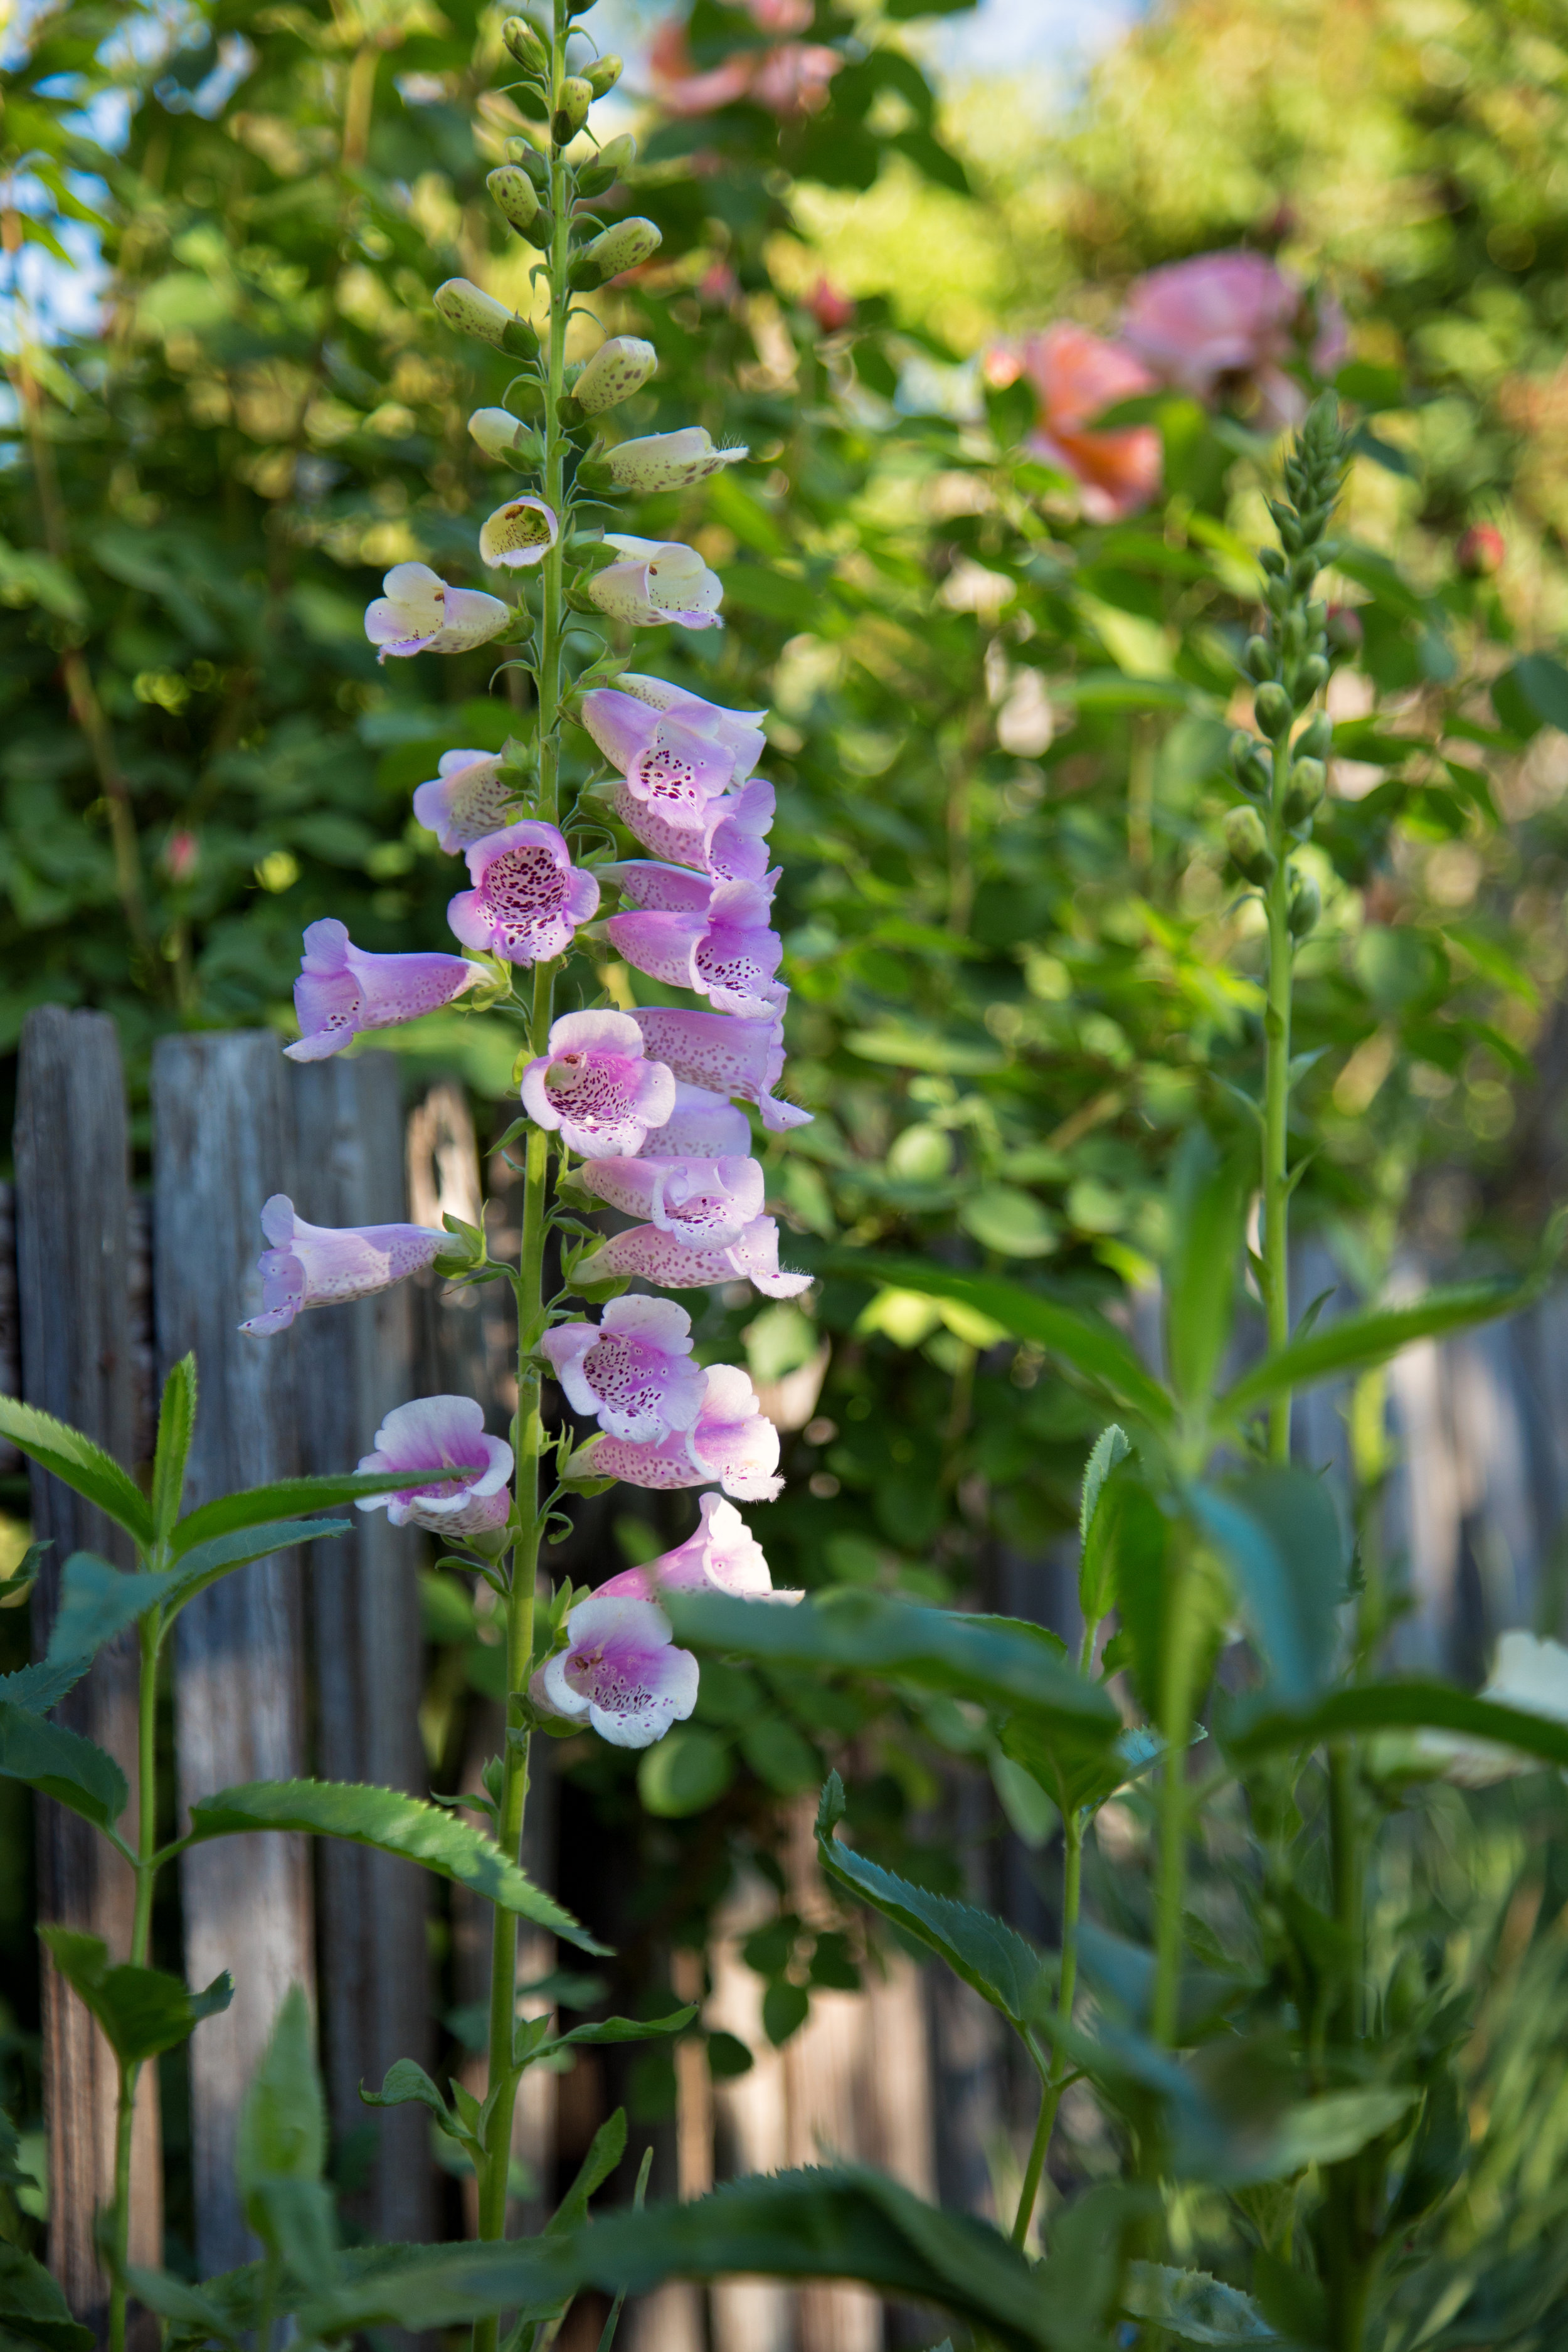 foxgloves-at-the-cottage-fence_26172103491_o.jpg